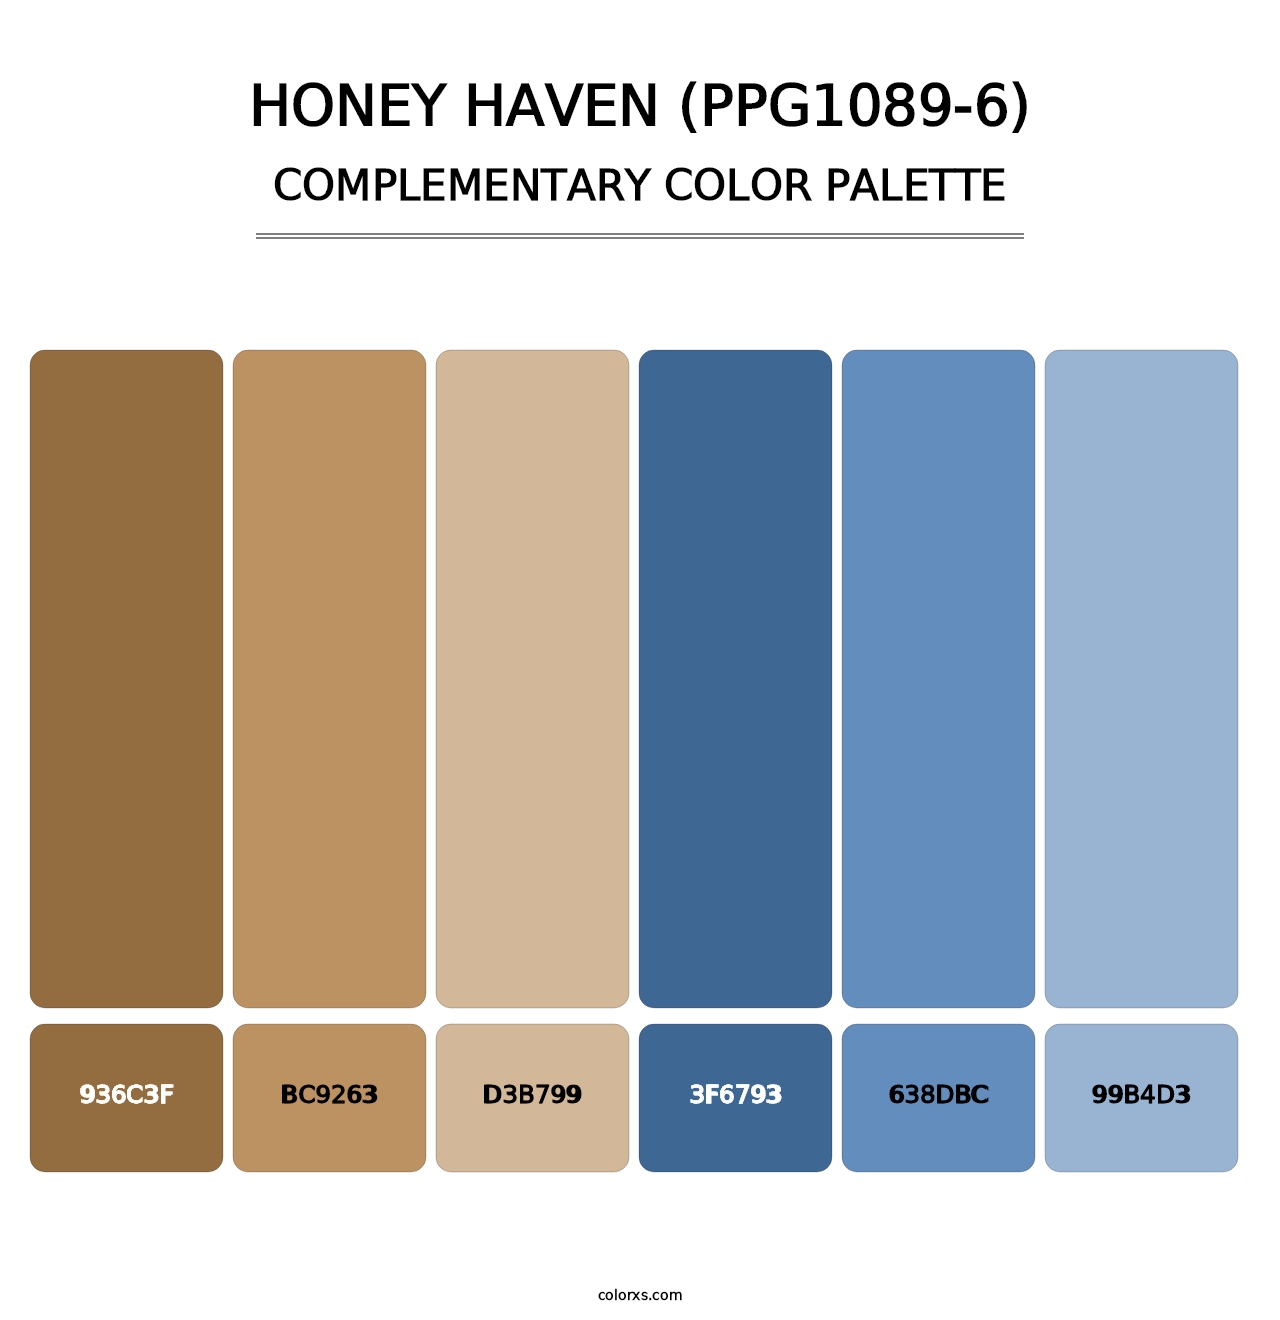 Honey Haven (PPG1089-6) - Complementary Color Palette